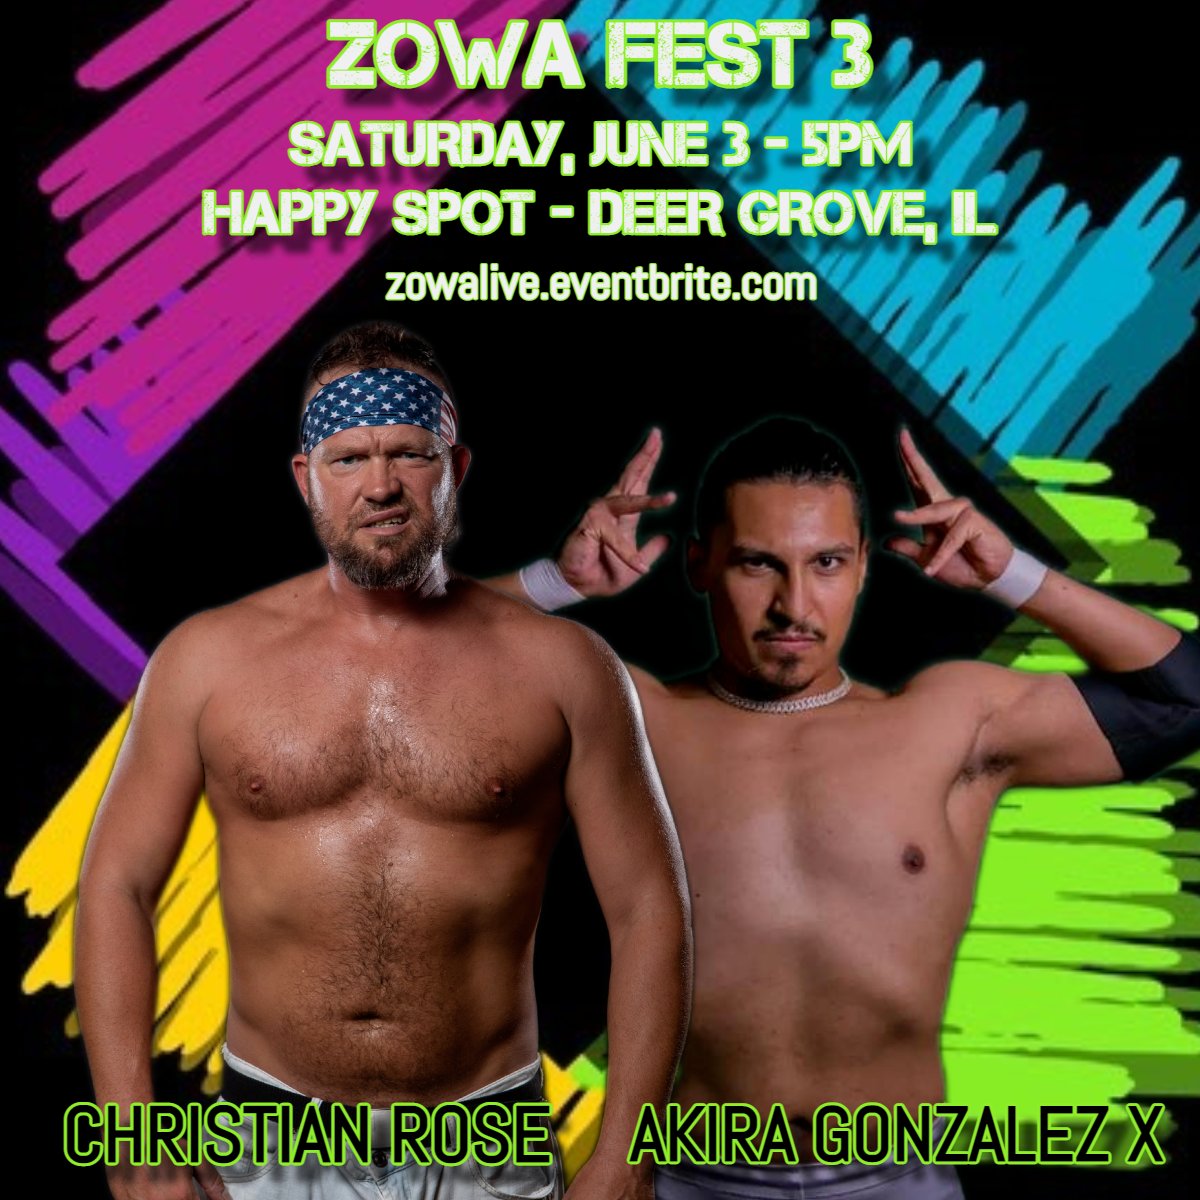 Christian Rose returns to ZOWA Live to take on up and comer Akira Gonzalez X on June 3 in Deer Grove, IL!